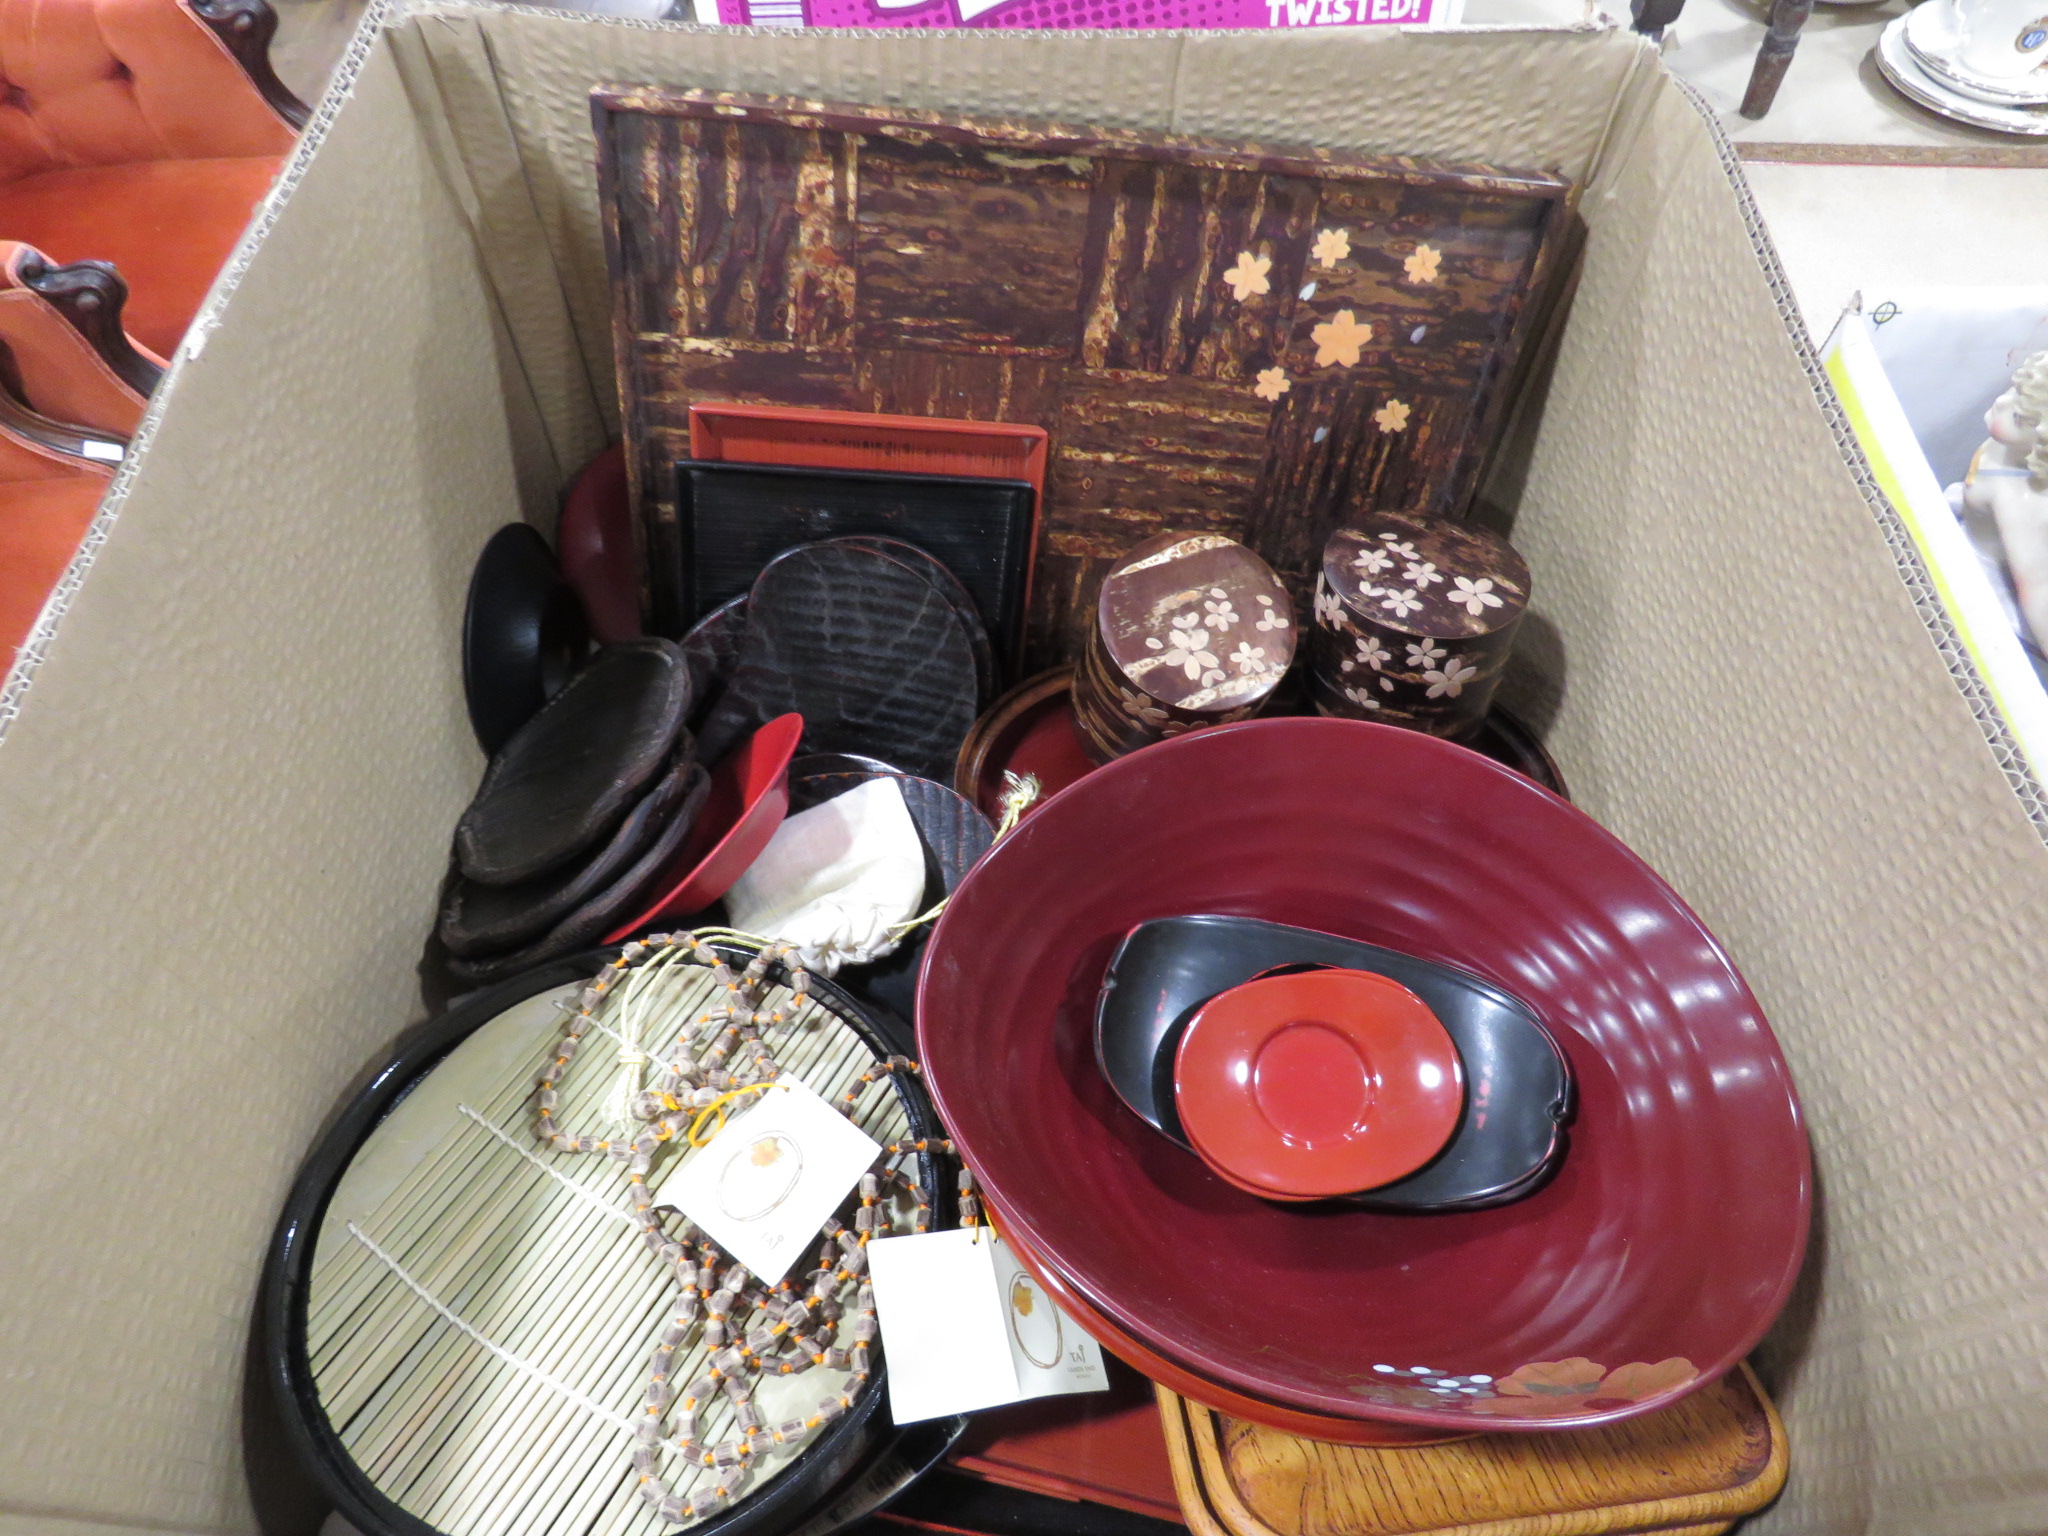 Box containing red and orange lacquered dishes plus storage pots and trays